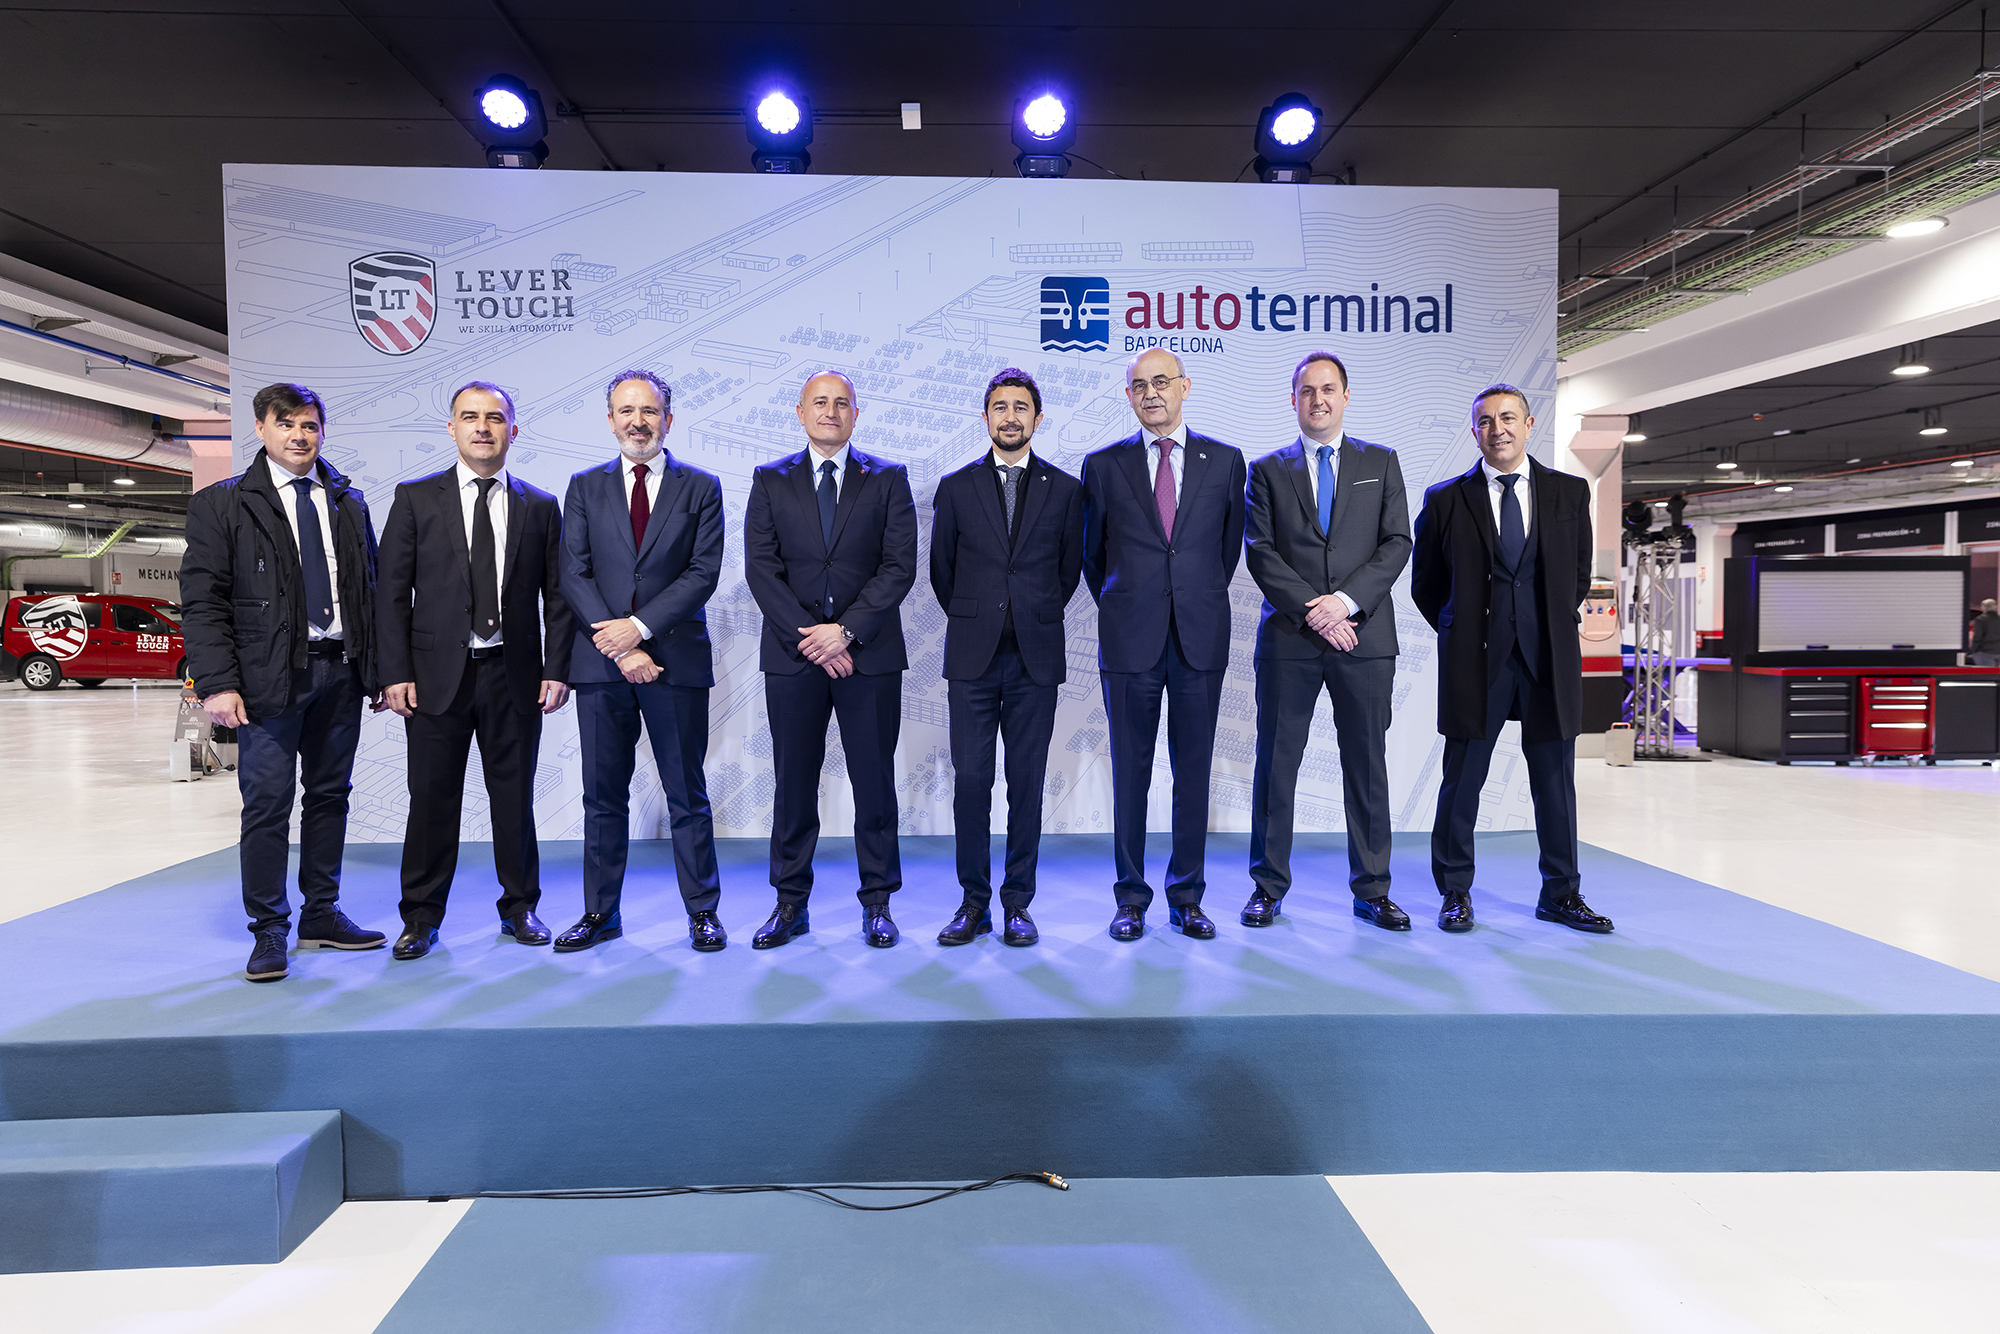 Inauguración Autoterminal Technical Center By Lever Touch